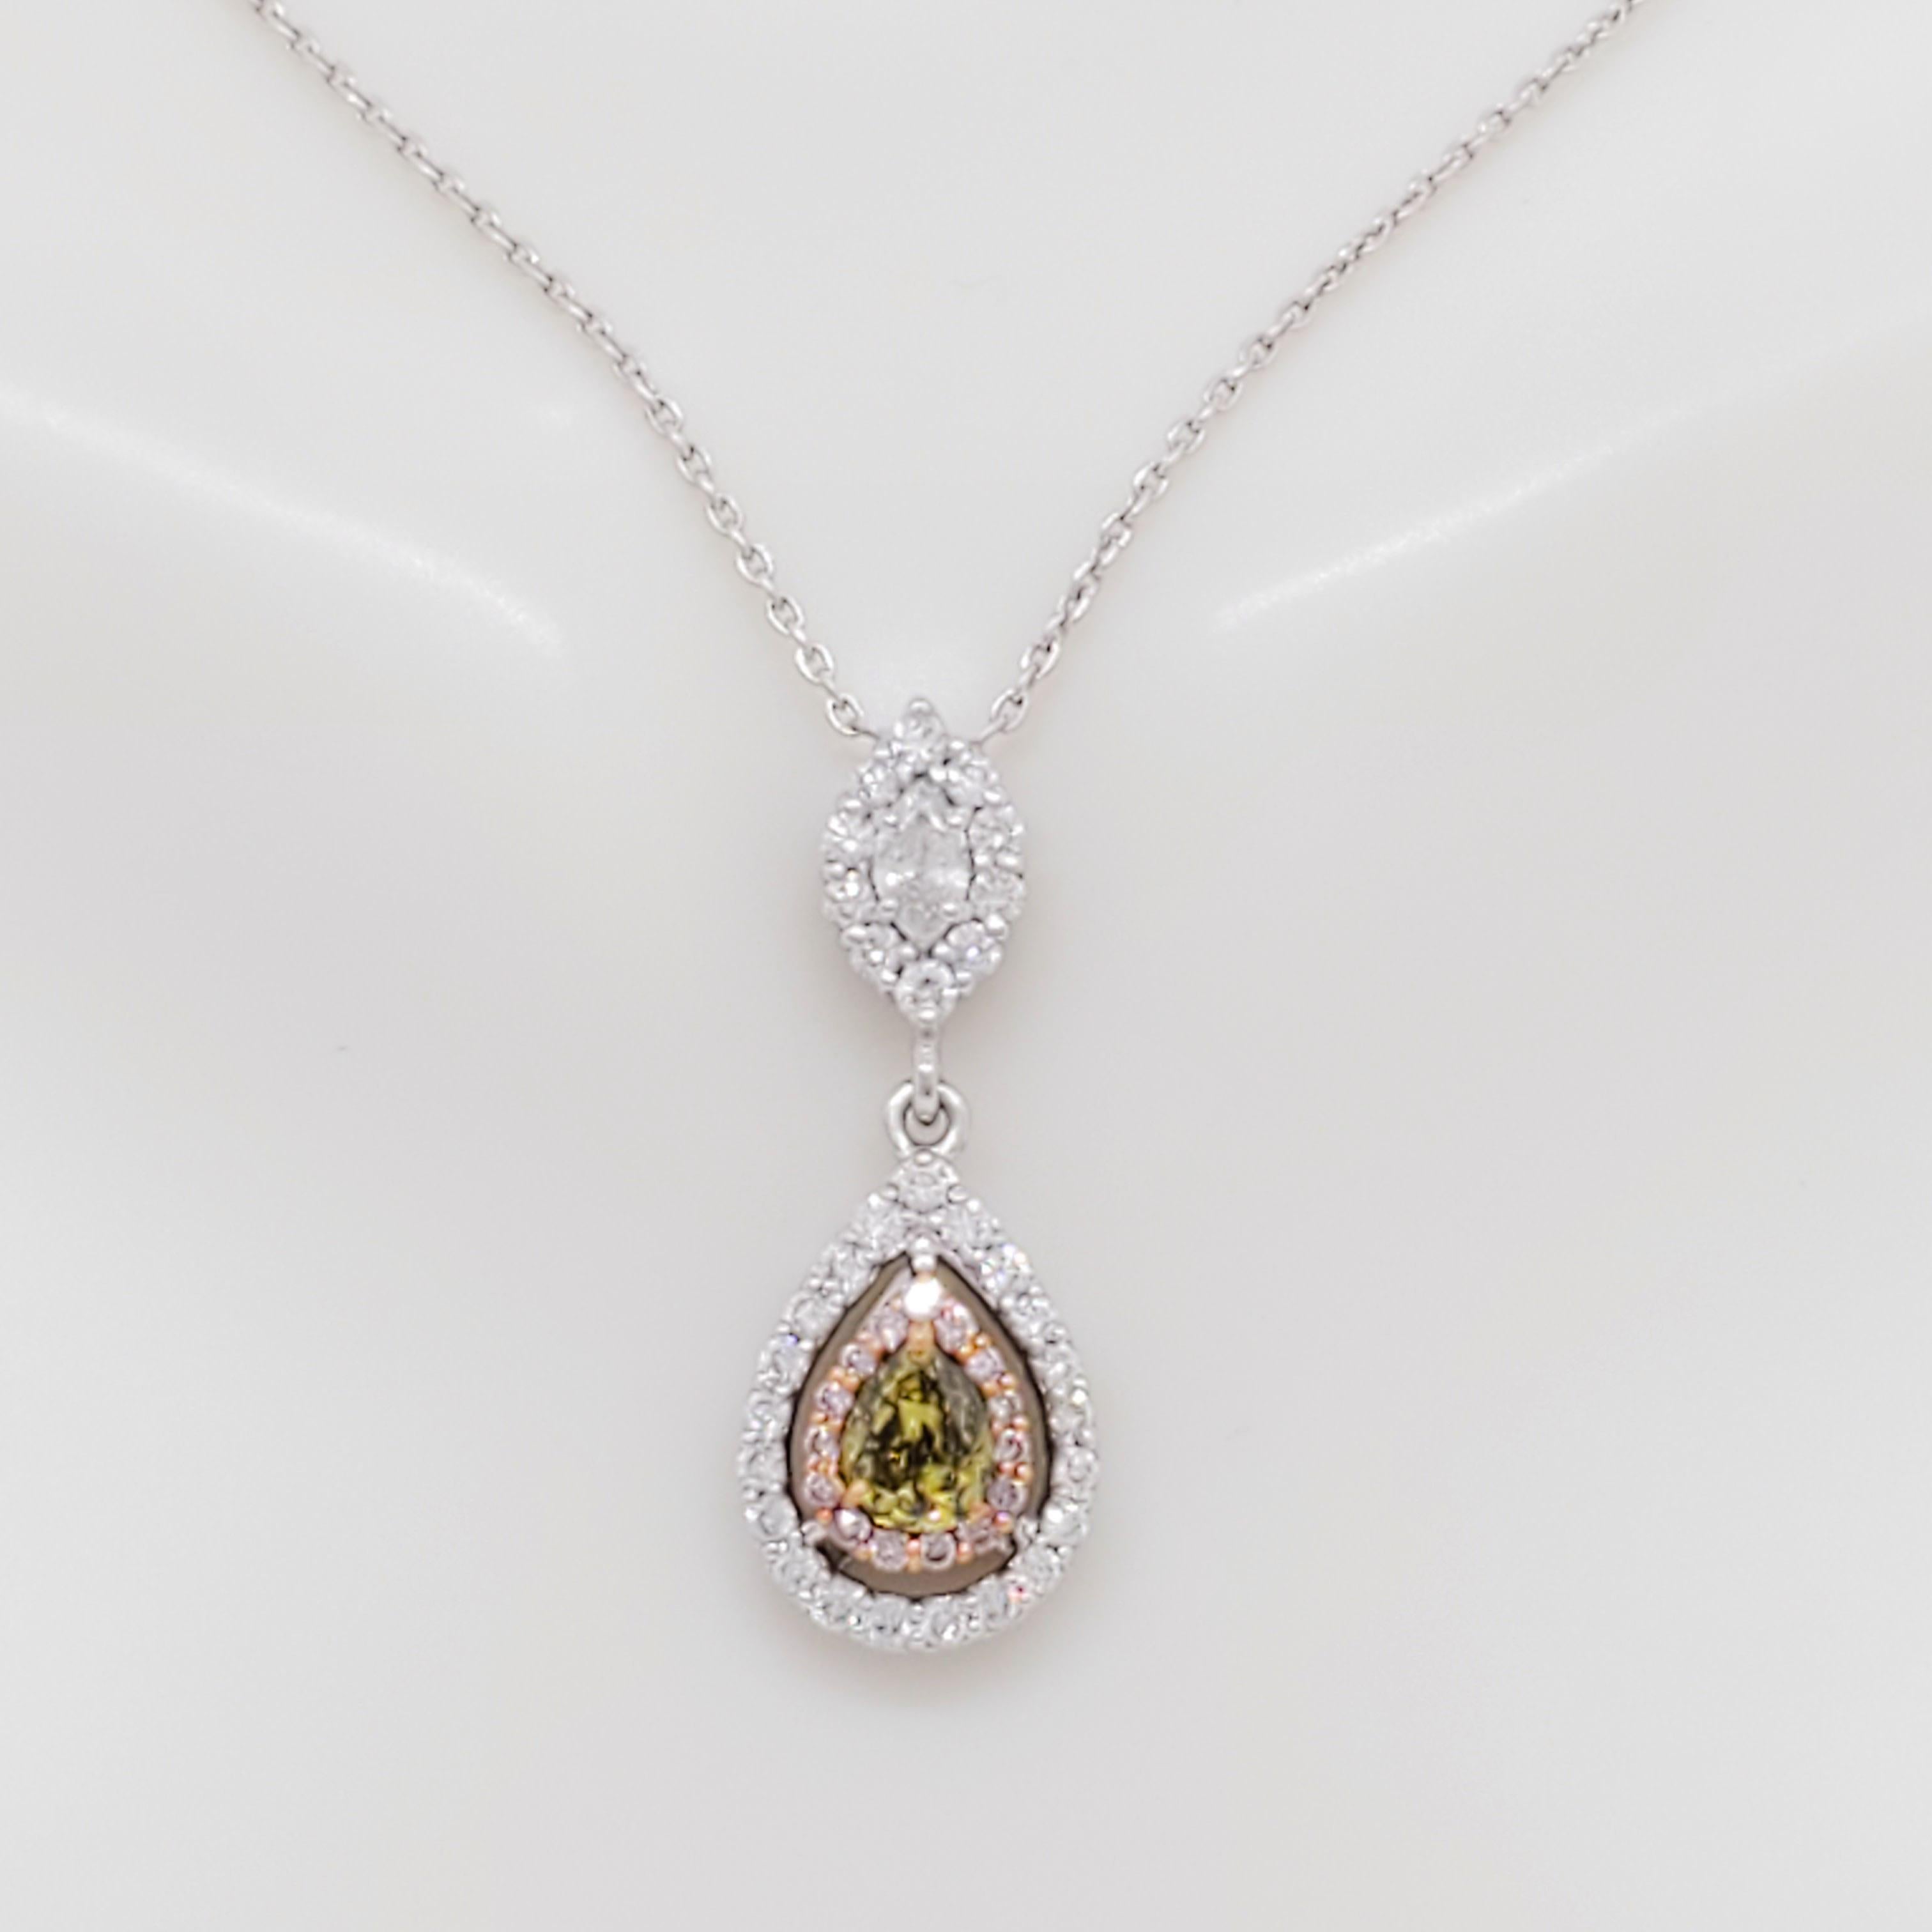 Gorgeous 1.00 ct. white and natural fancy multi color round, marquise, and pear shape diamonds in a handmade 18k white gold mounting.  Adjustable chain.